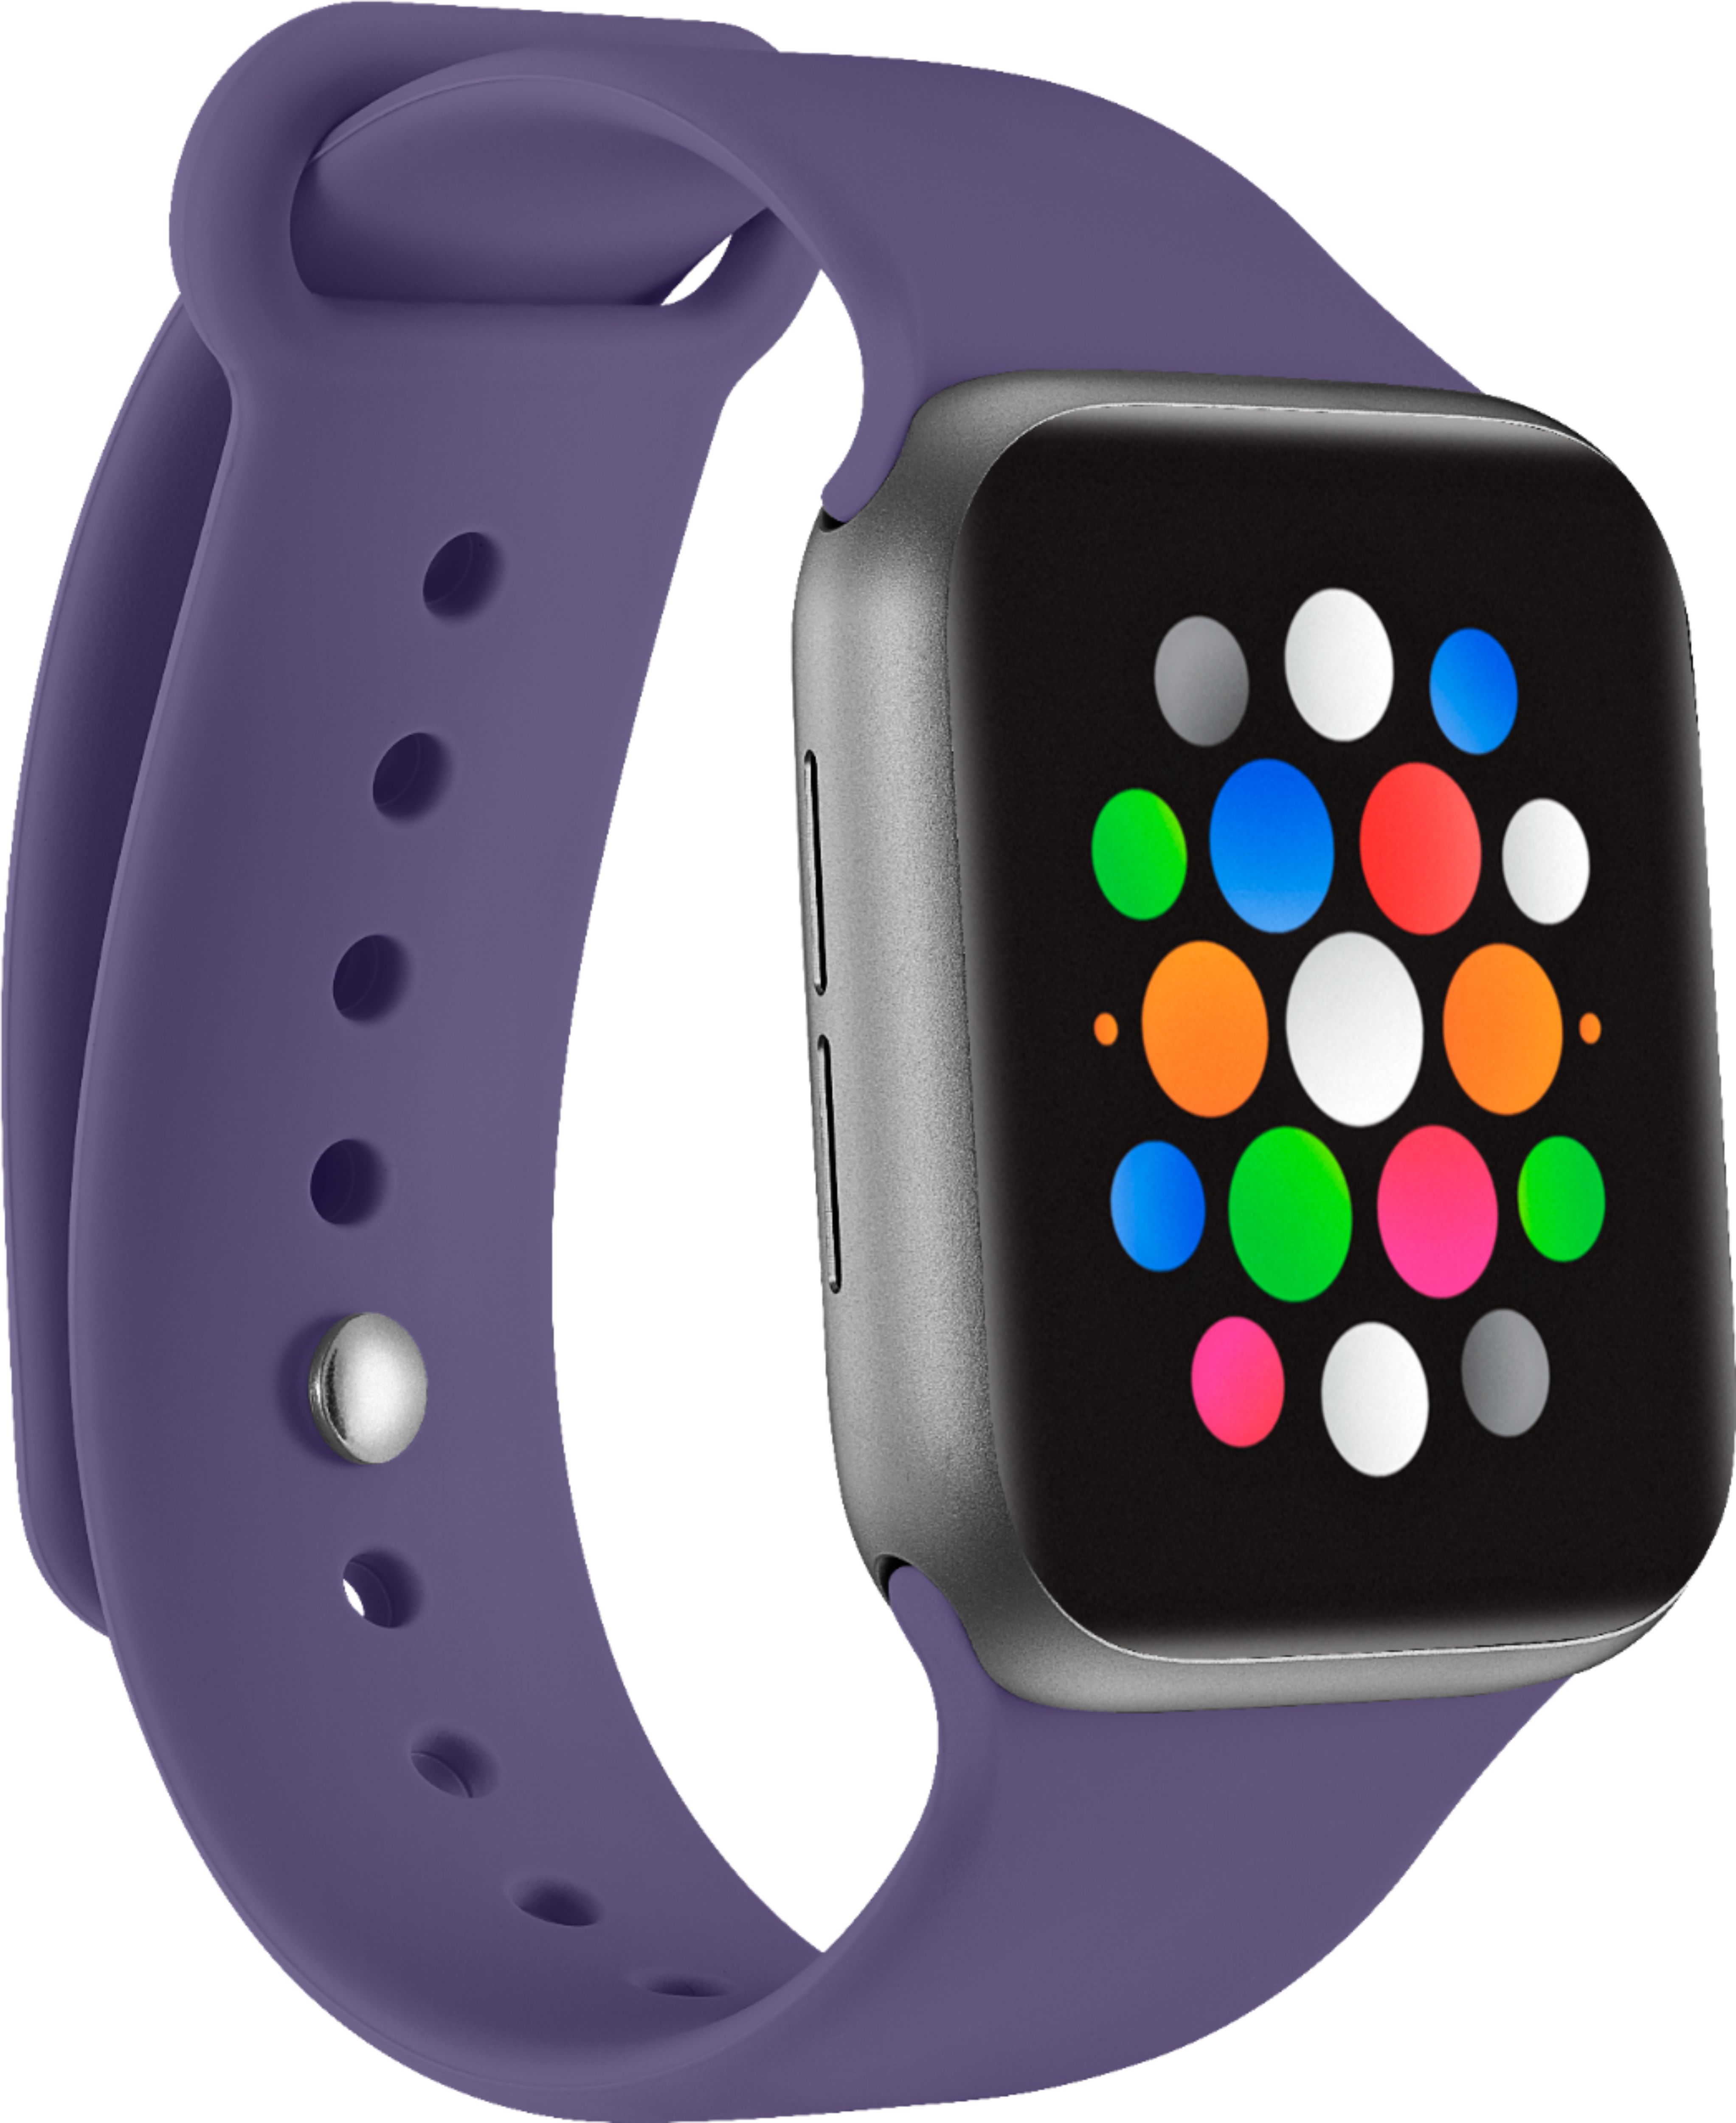 Angle View: Modal™ - Silicone Band for Apple Watch 38mm, 40mm, 41mm and Apple Watch Series 8 41mm - Bright Blue